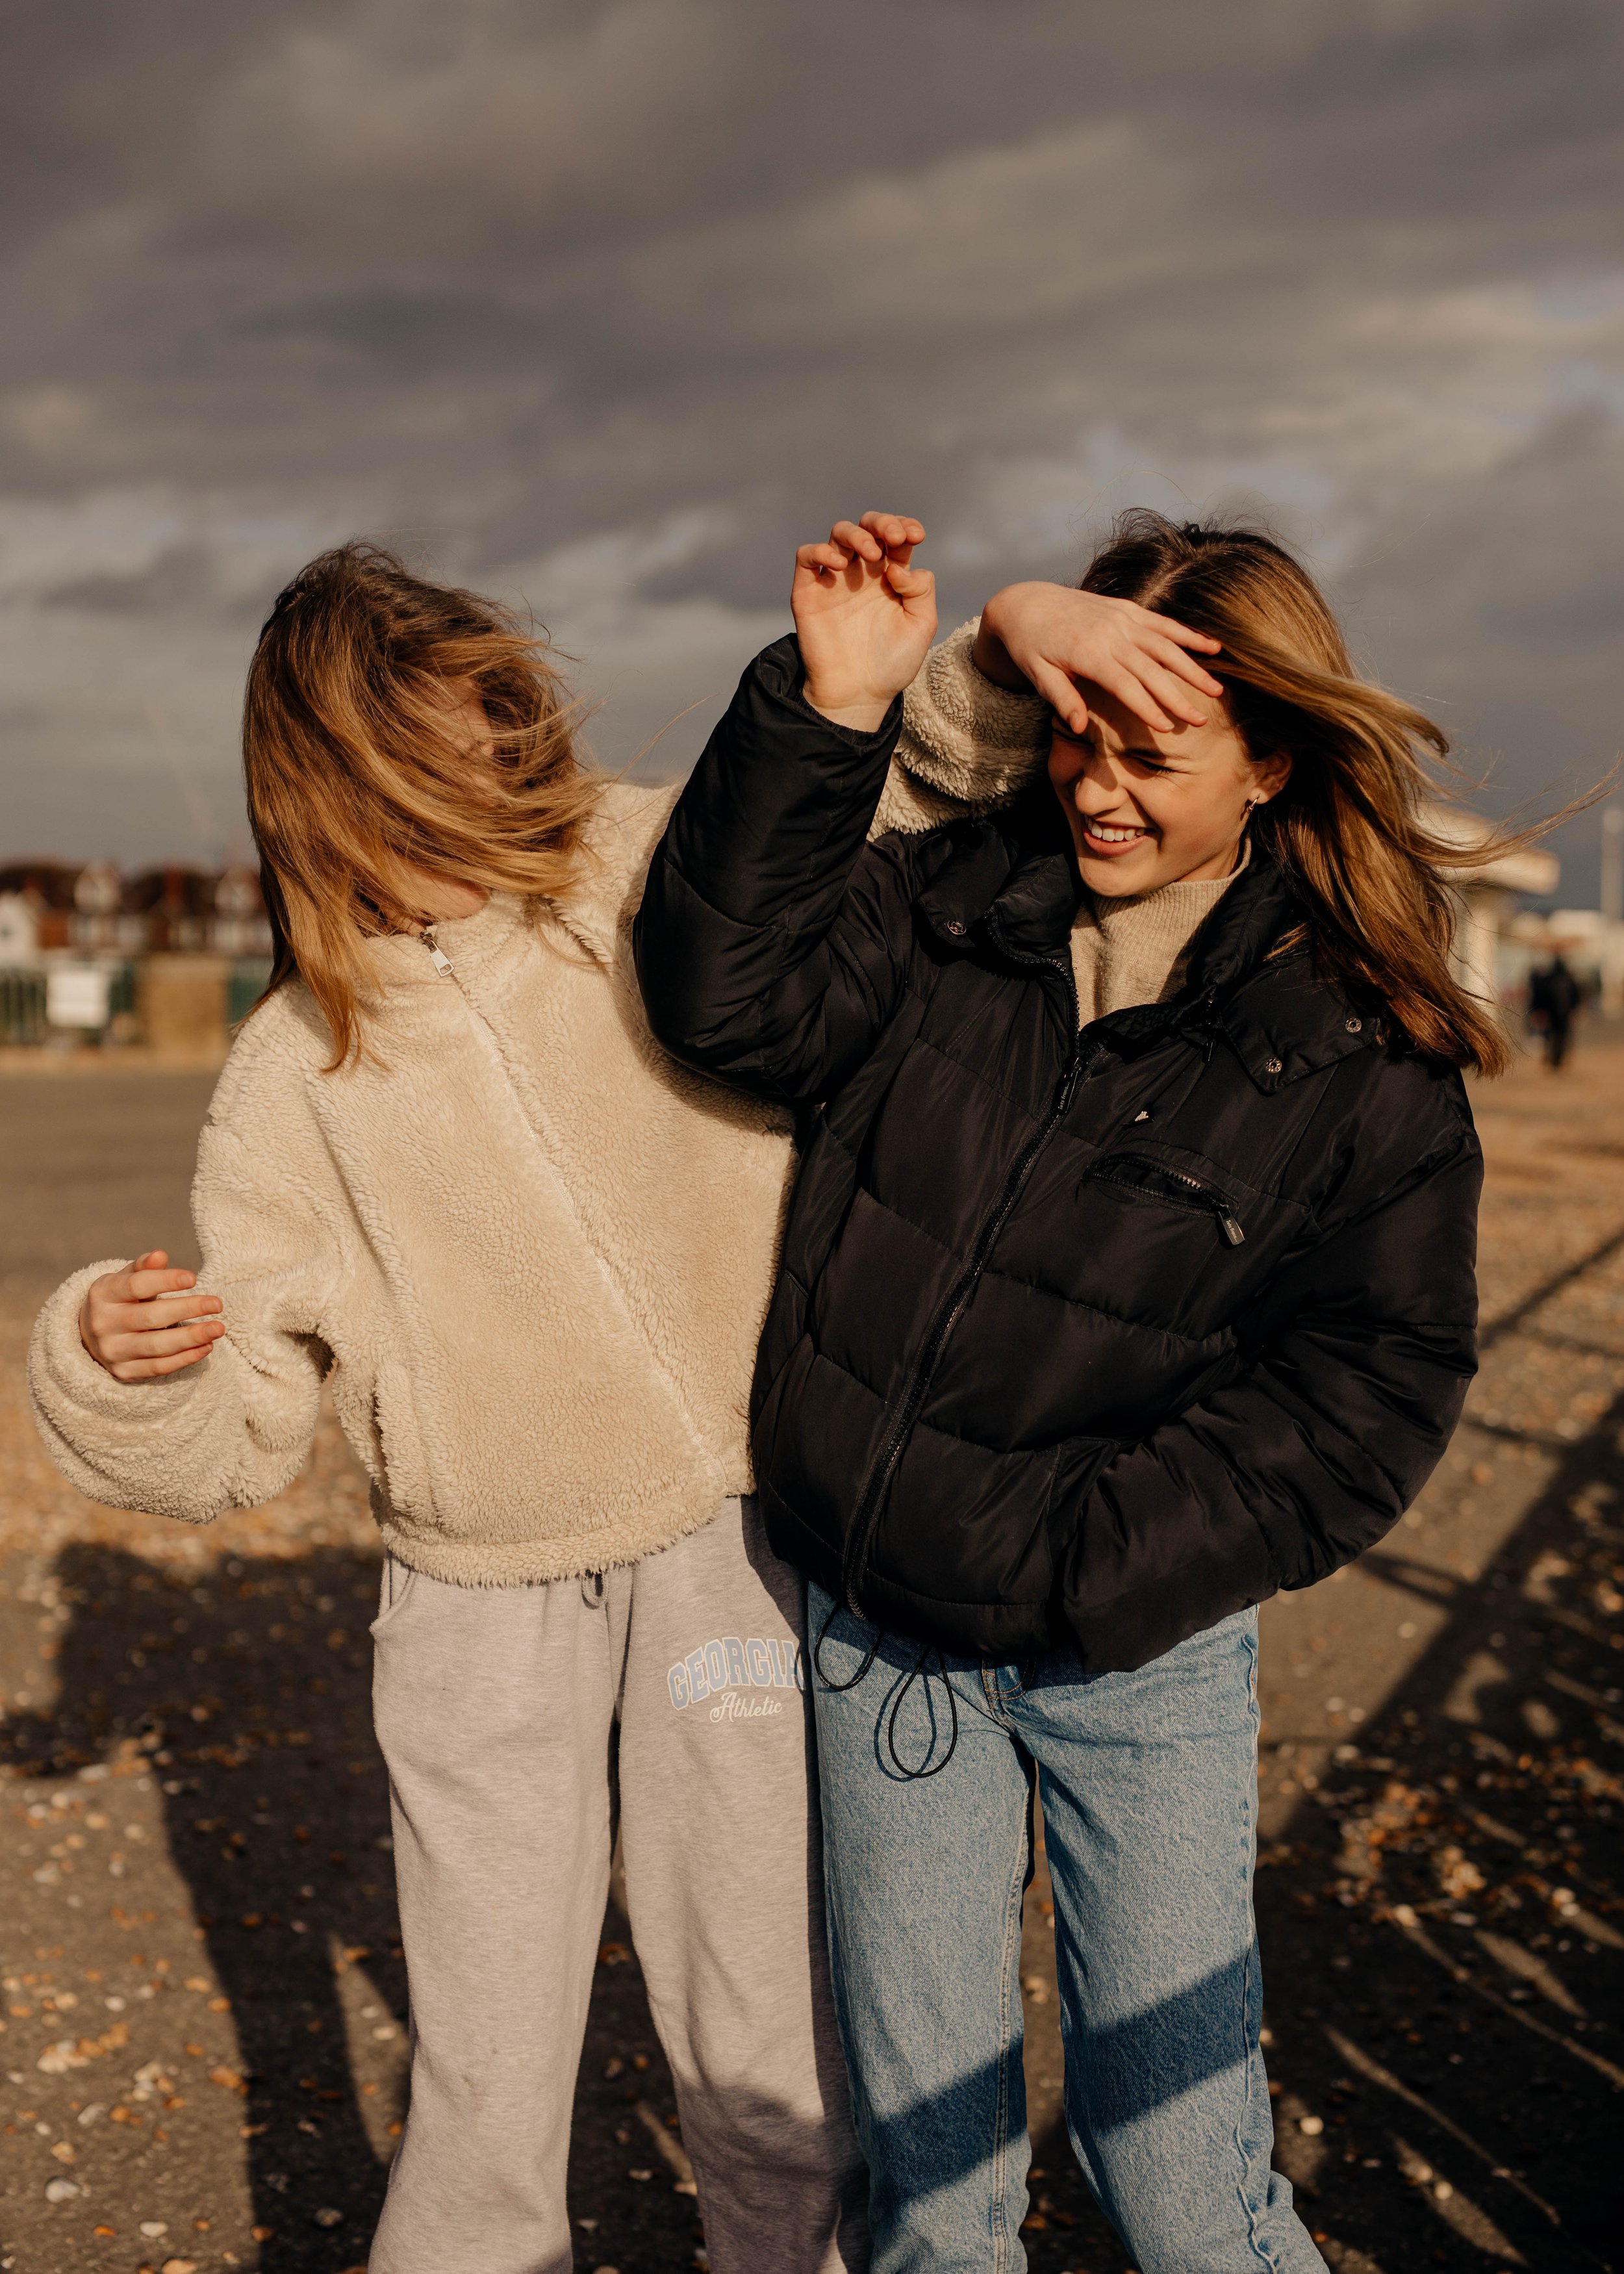  Young TikTok stars Elodie and Mireille Lee  The New York Times  